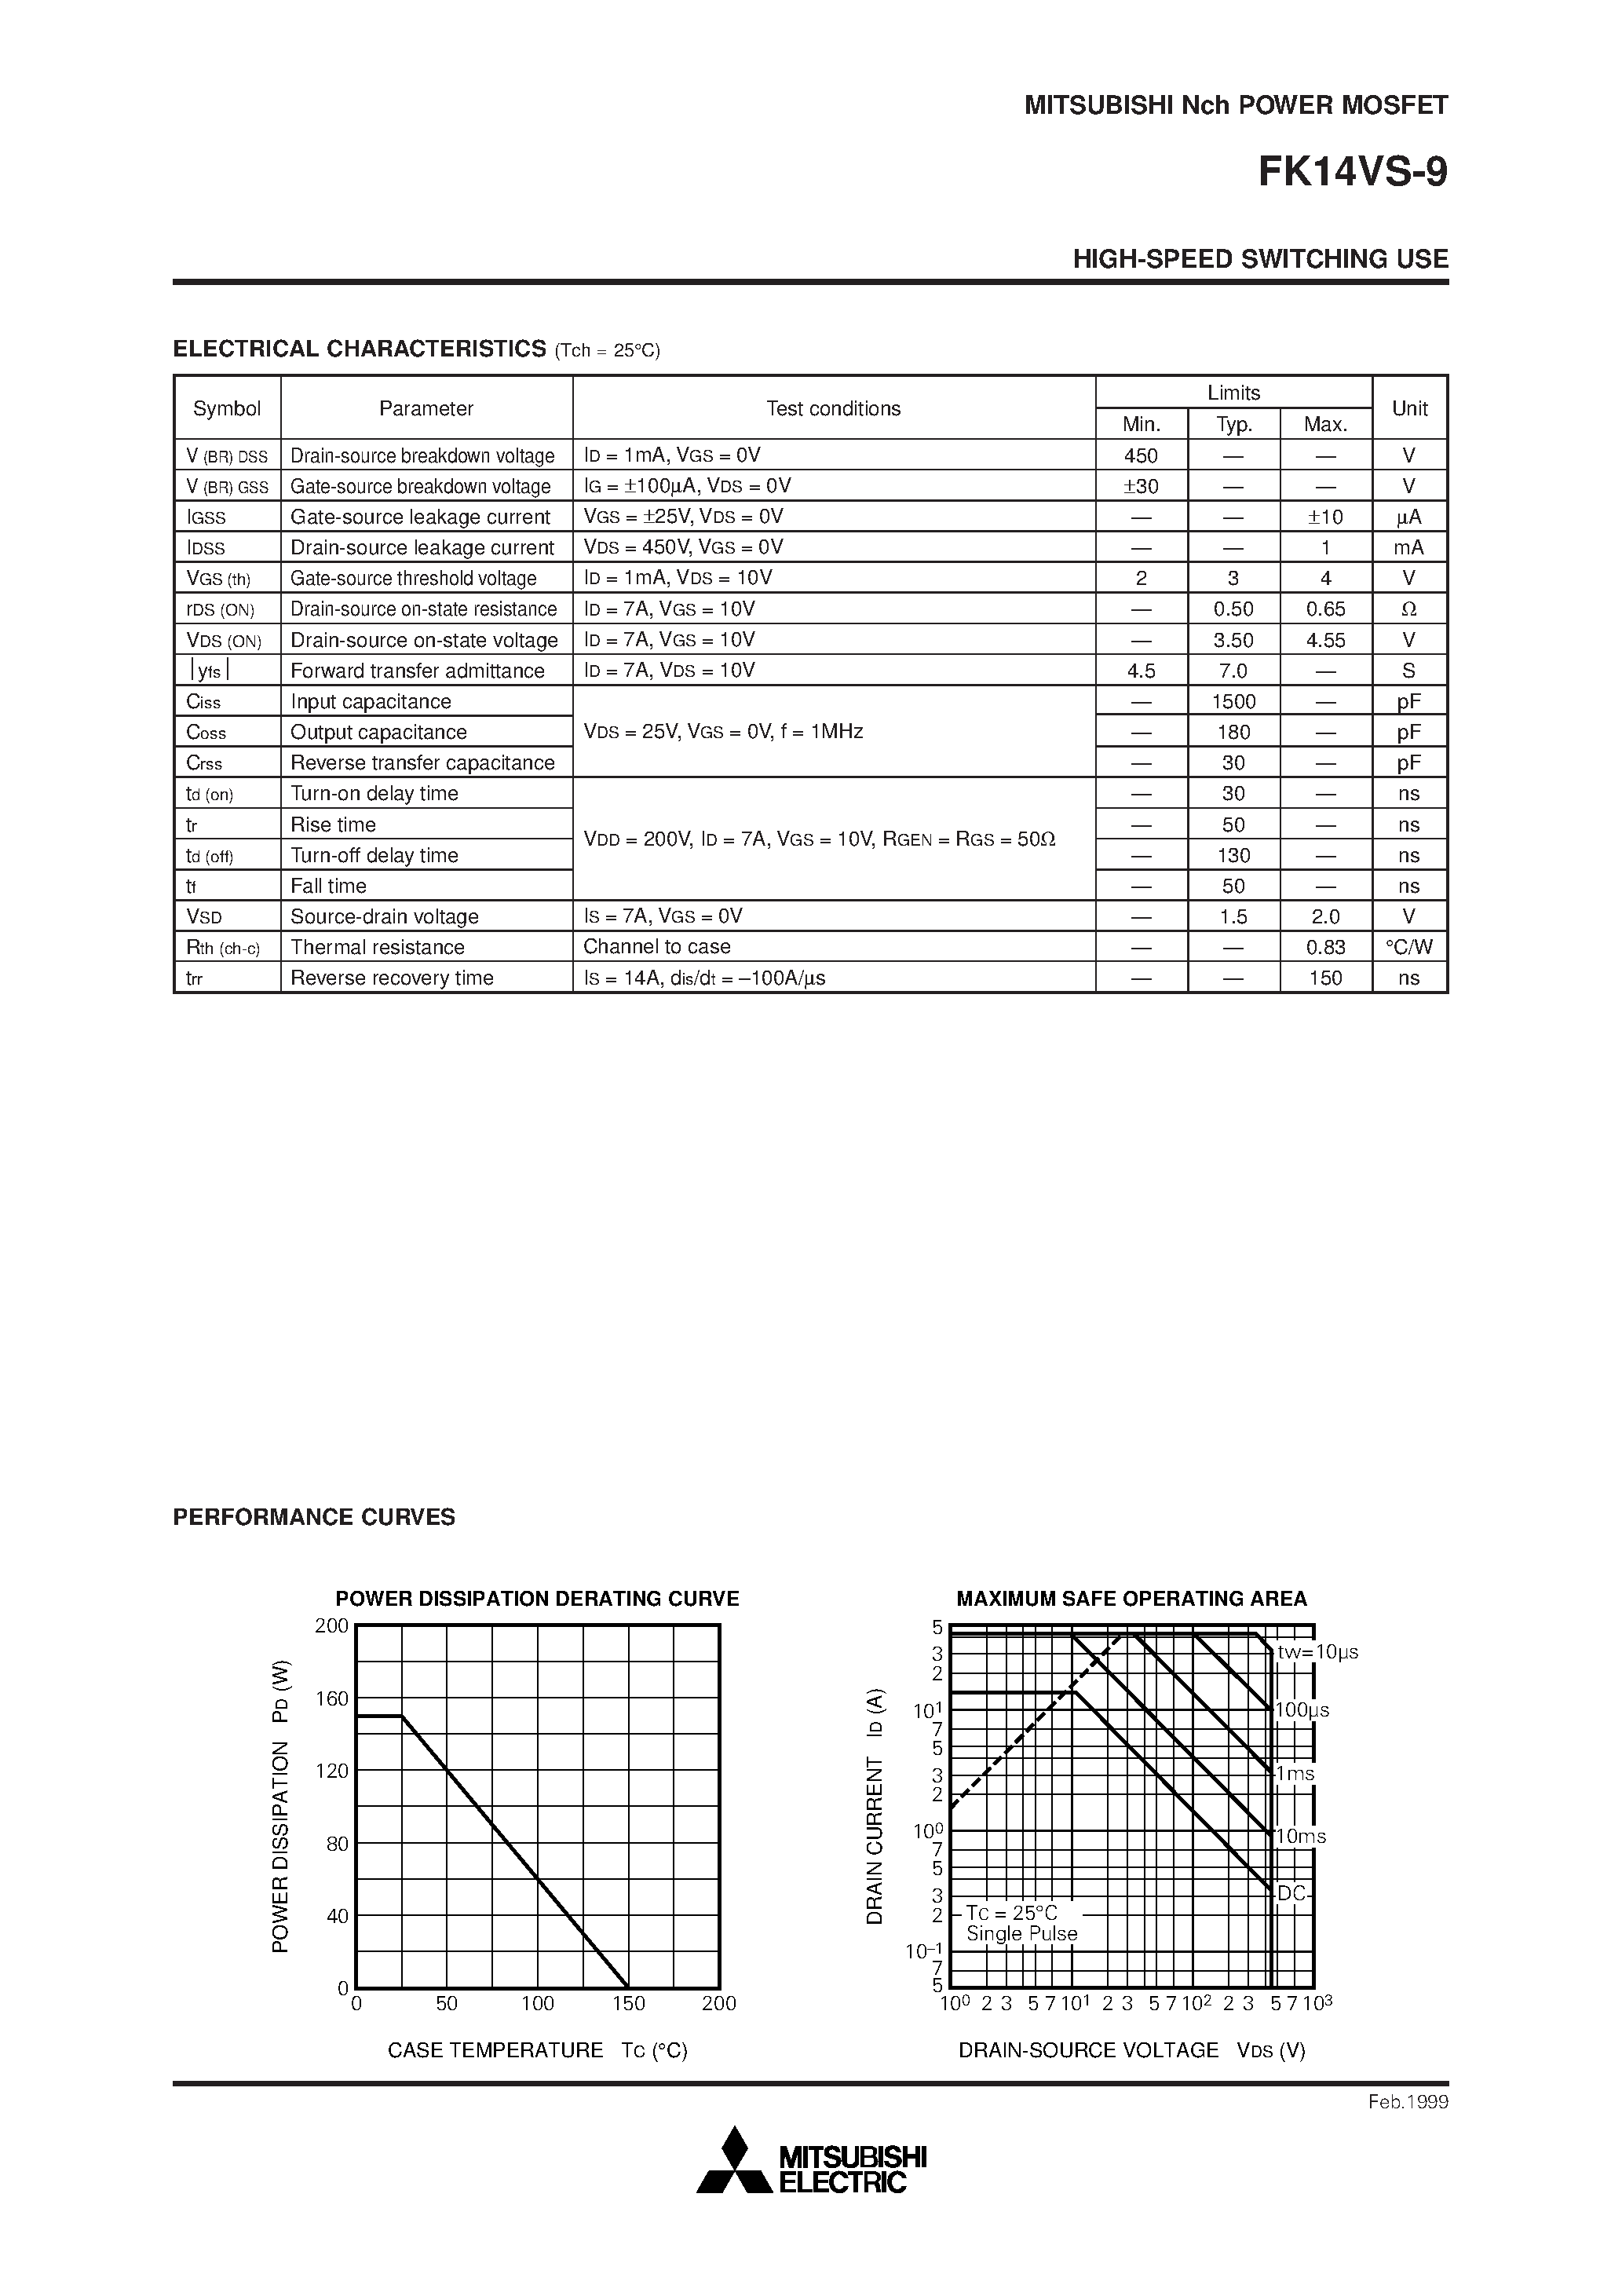 Datasheet FK14VS-9 - Nch POWER MOSFET HIGH-SPEED SWITCHING USE page 2